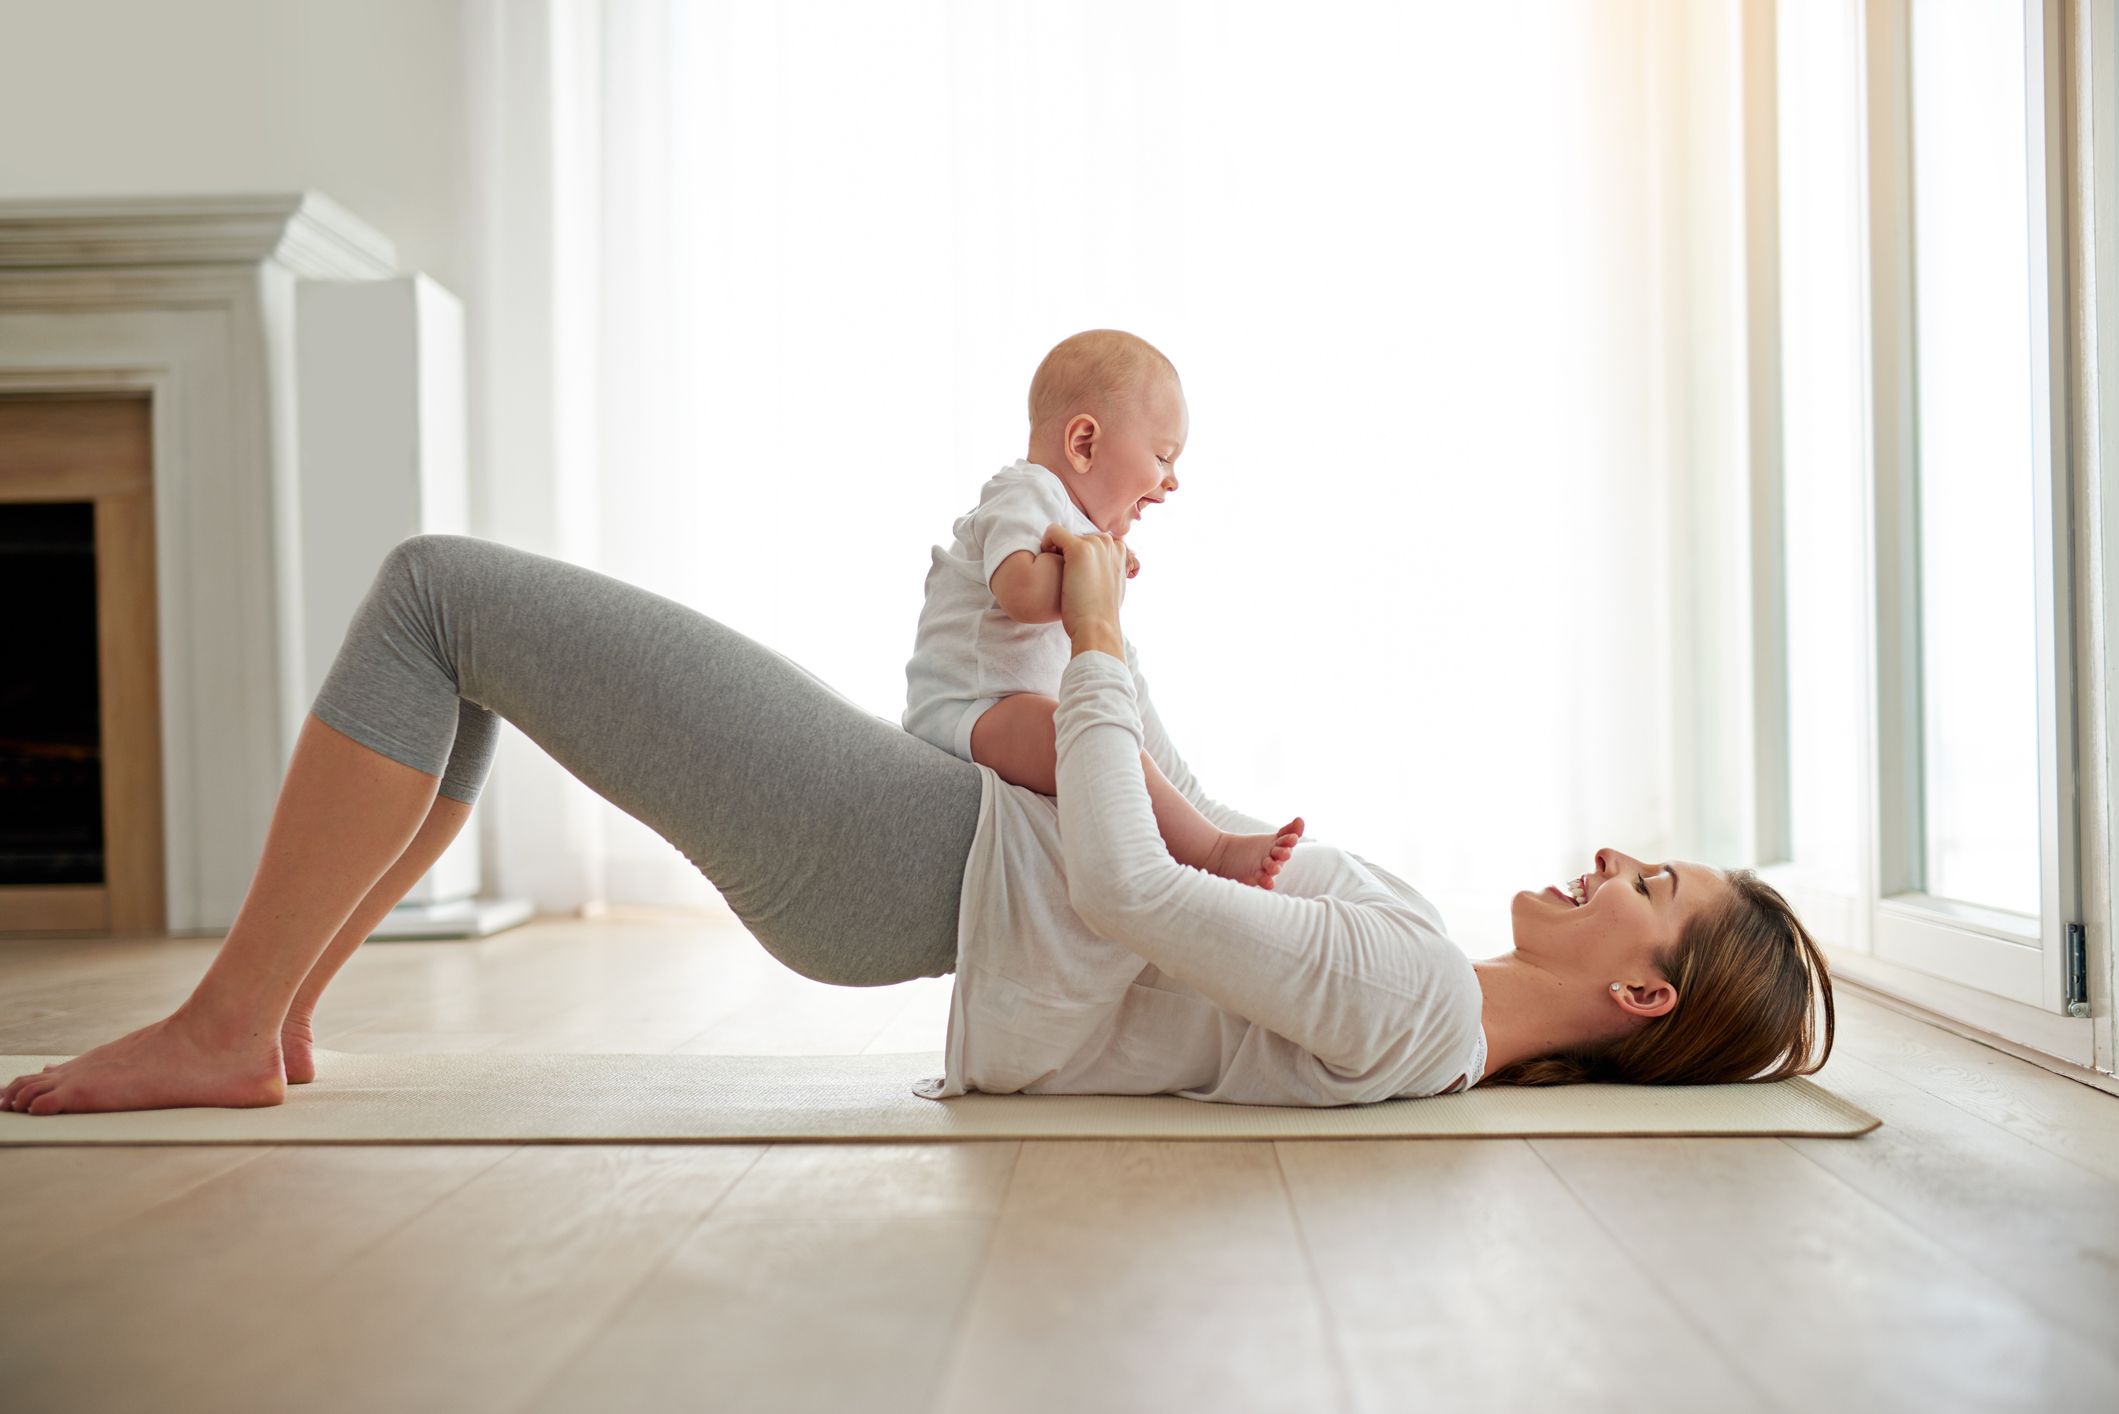 5 Self-Care Tips for New Moms That Barely Cost a Thing